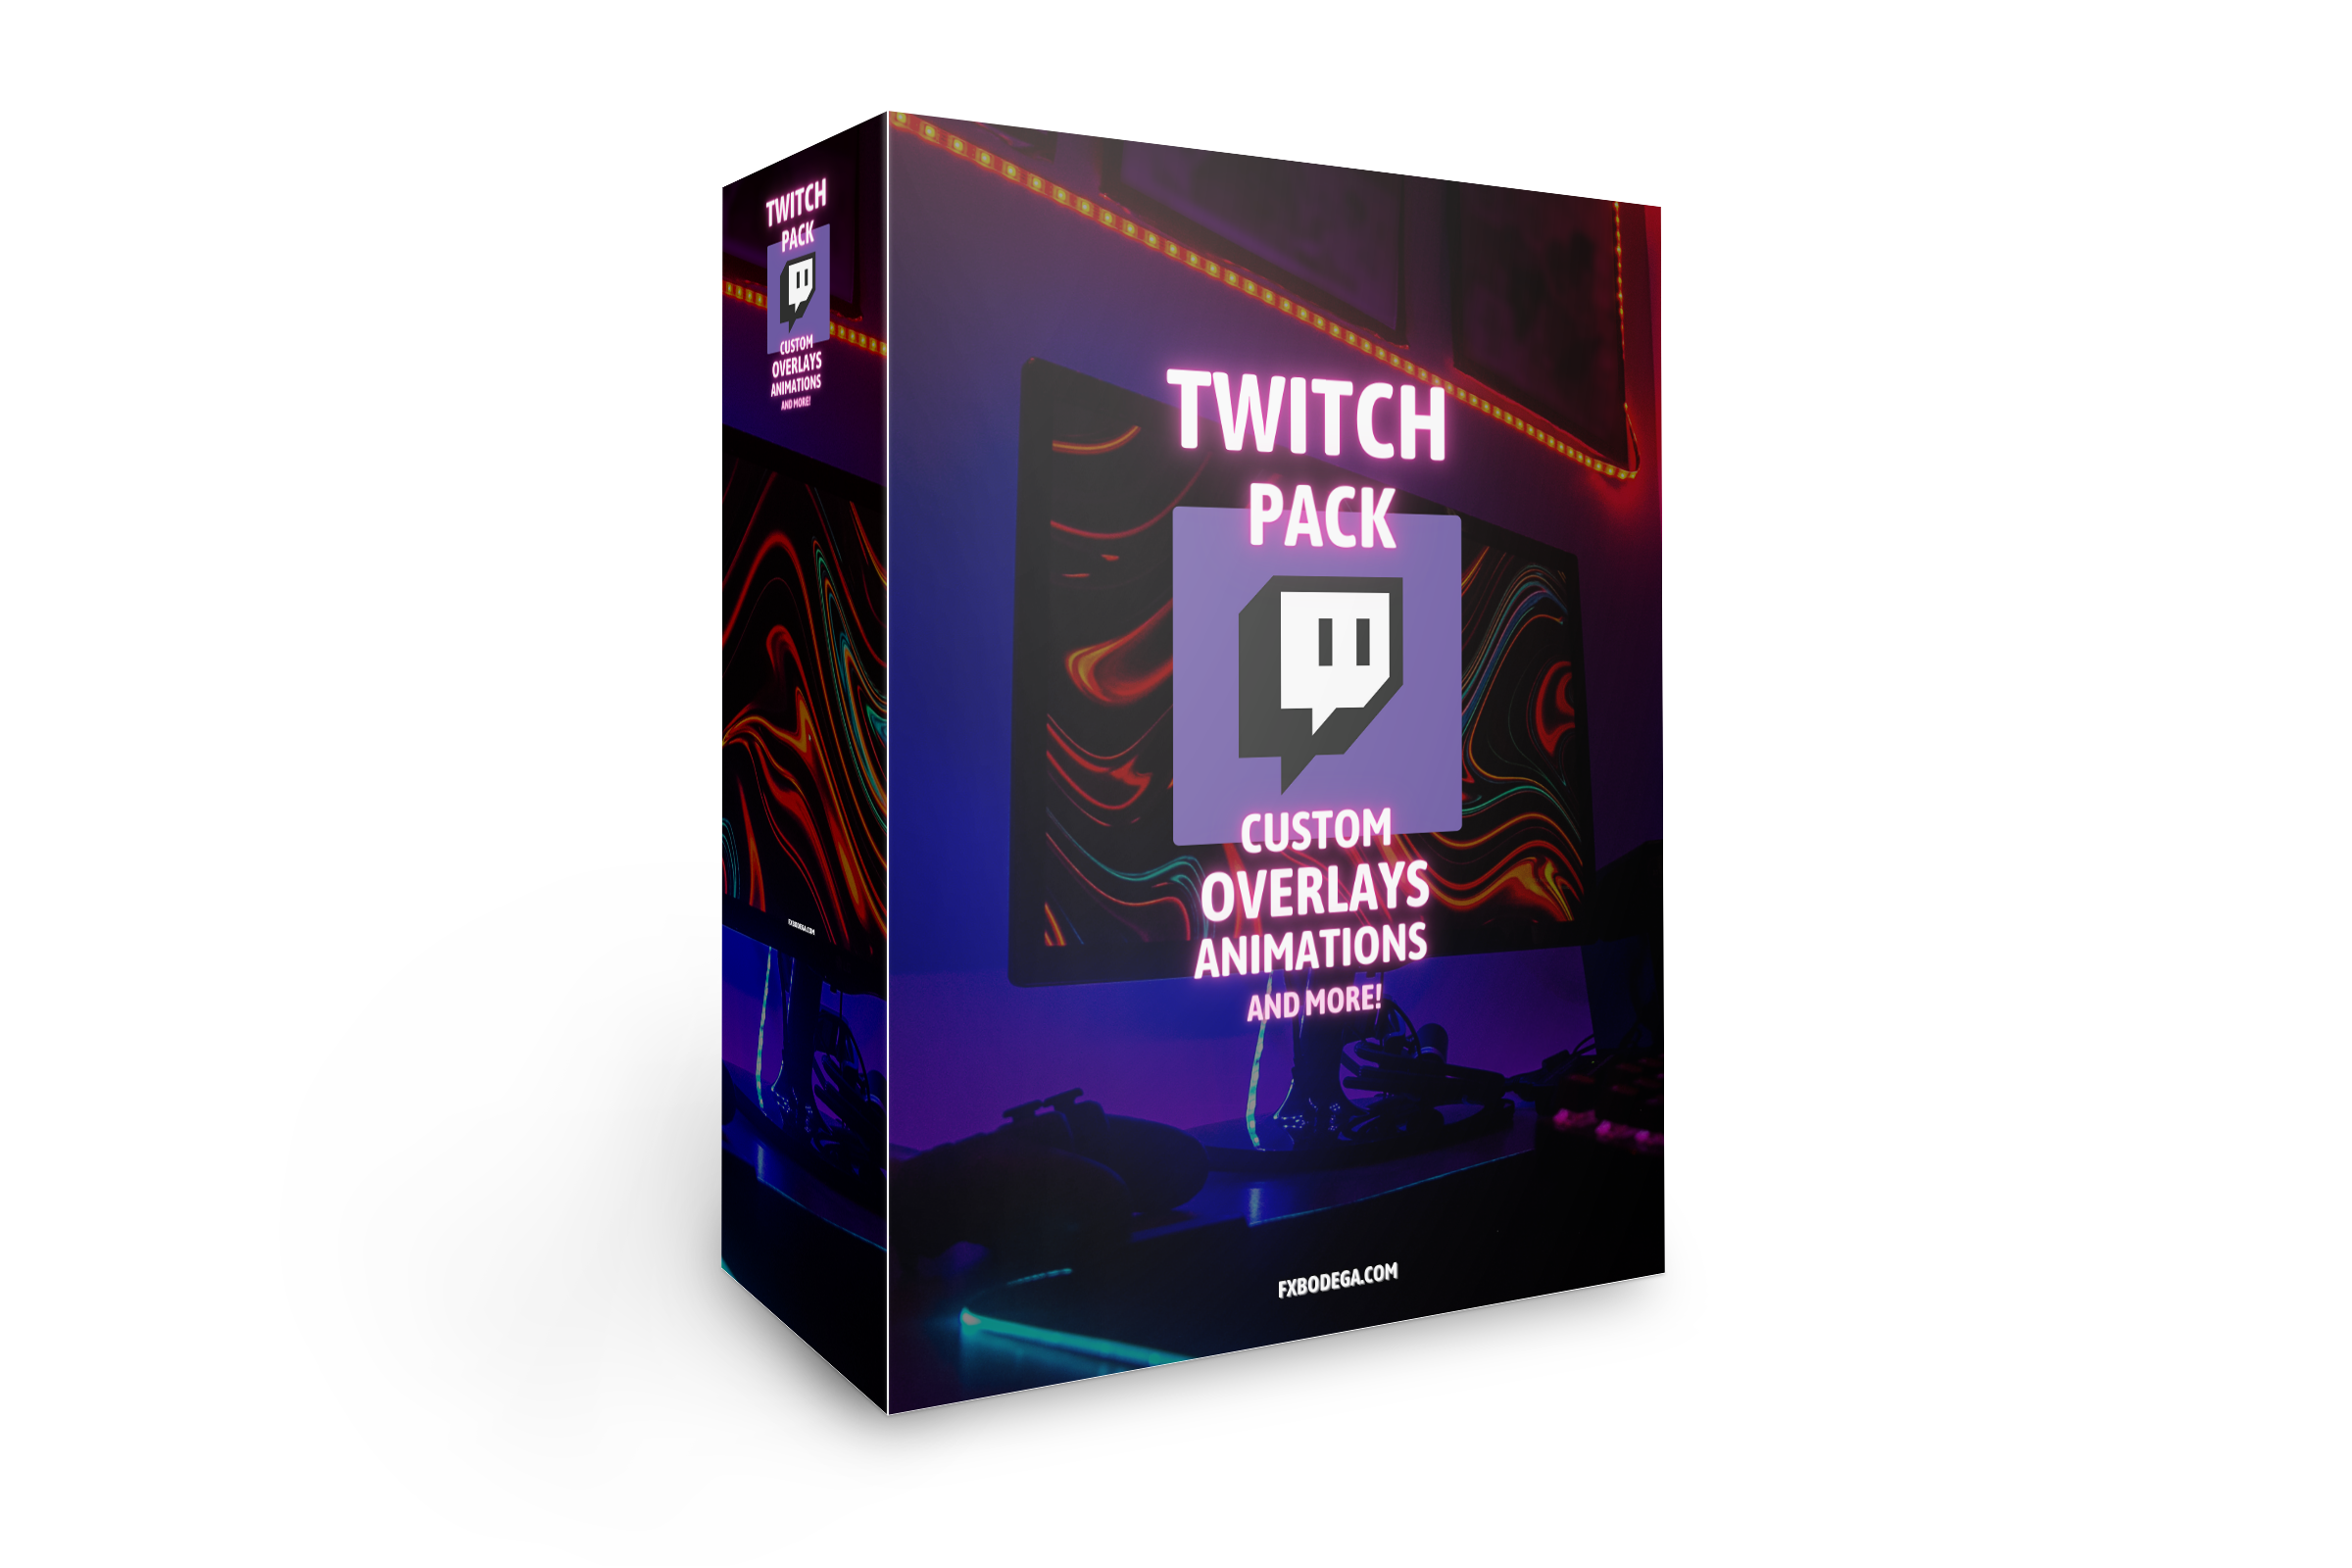 Twitch Pack